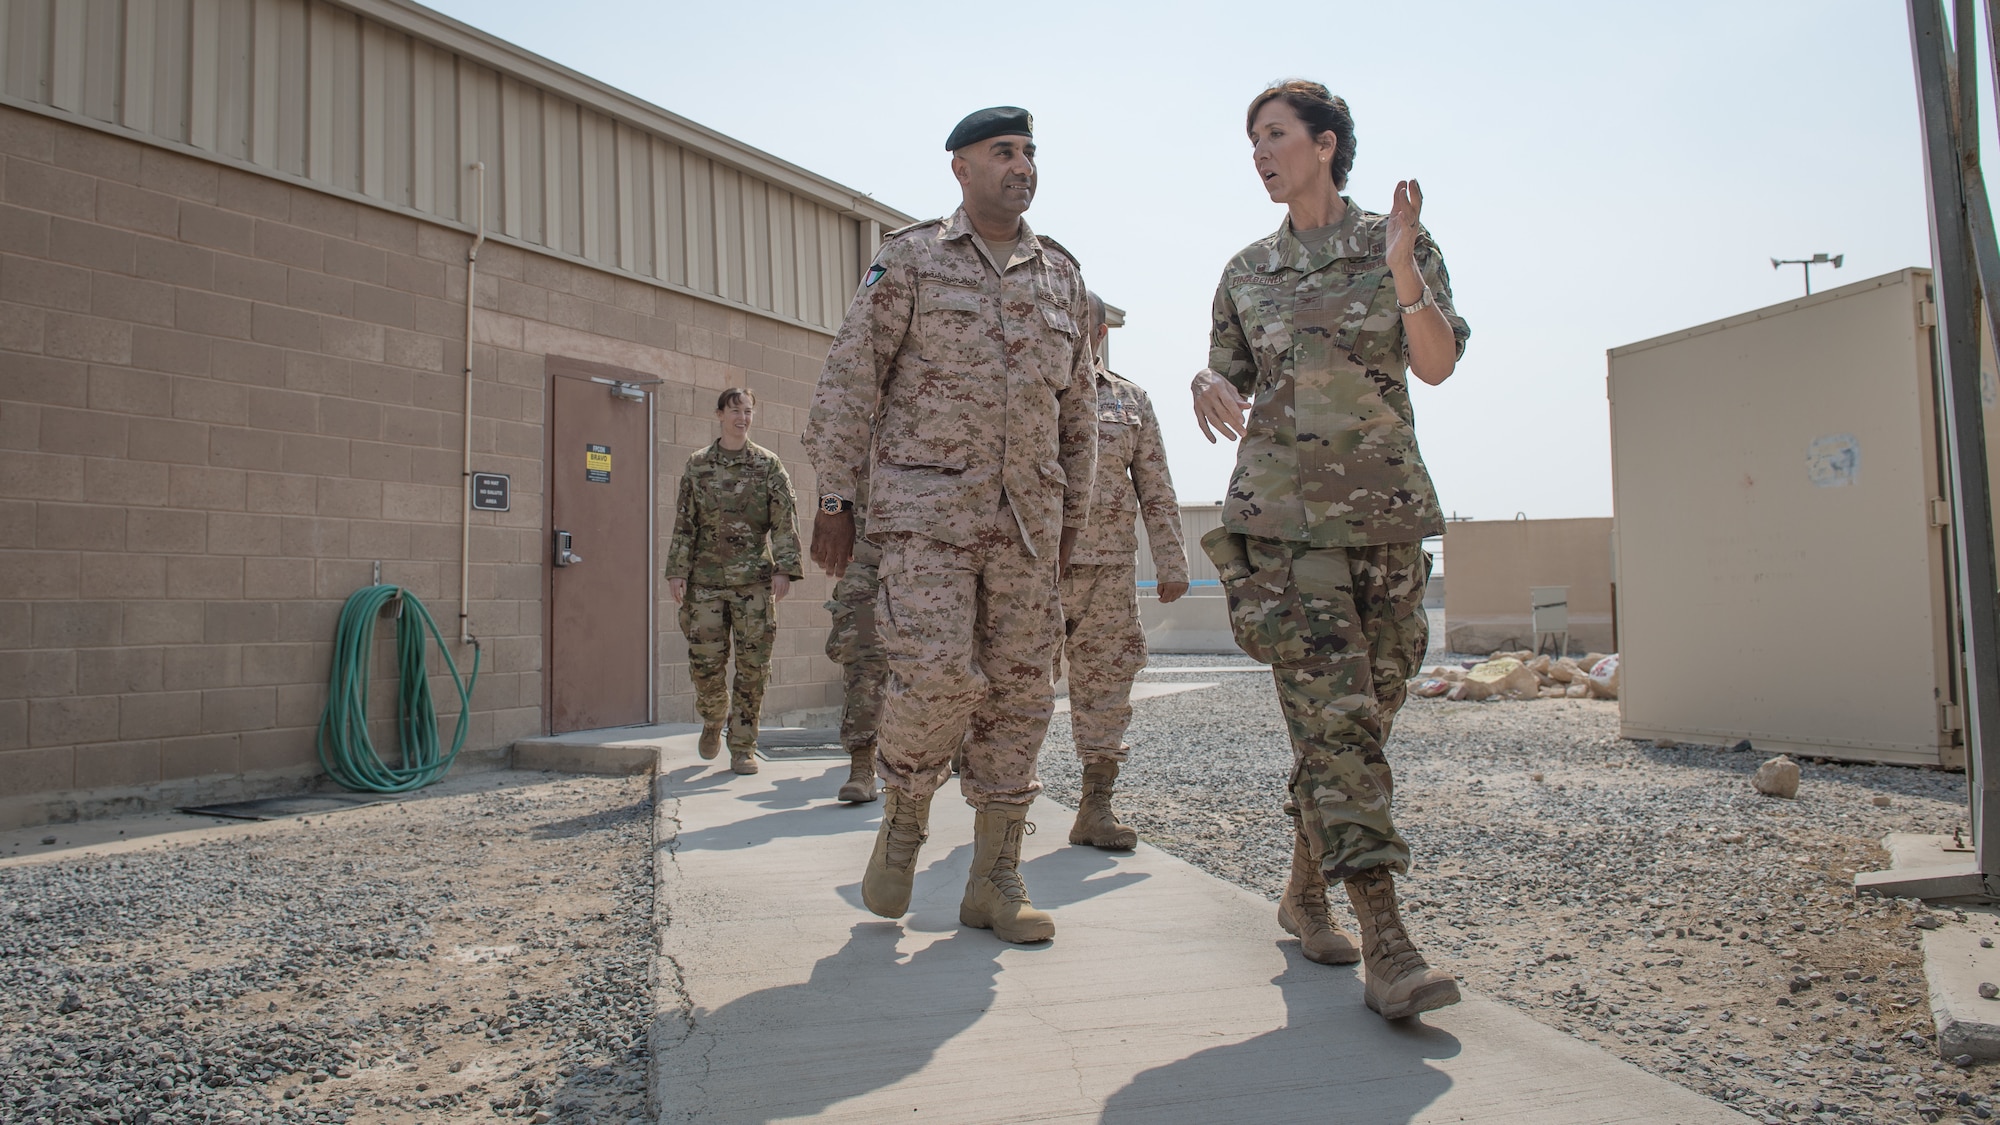 U.S. Air Force Col. Courtney Finkbeiner, right, 386th Expeditionary Medical Group commander, talks with Kuwait army Col. Nawaf Jandoul Al-Dousari, North Military Medical Complex director, while taking a tour of the 386th EMDG base clinic at Ali Al Salem Air Base, Kuwait, Oct. 16, 2019. The Kuwait army directors of the North Military Medical Complex visited the 386th EMDG clinic to tour the facility, share ideas on improving medical care and discuss strengthening interoperability. (U.S. Air Force photo by Tech. Sgt. Daniel Martinez)